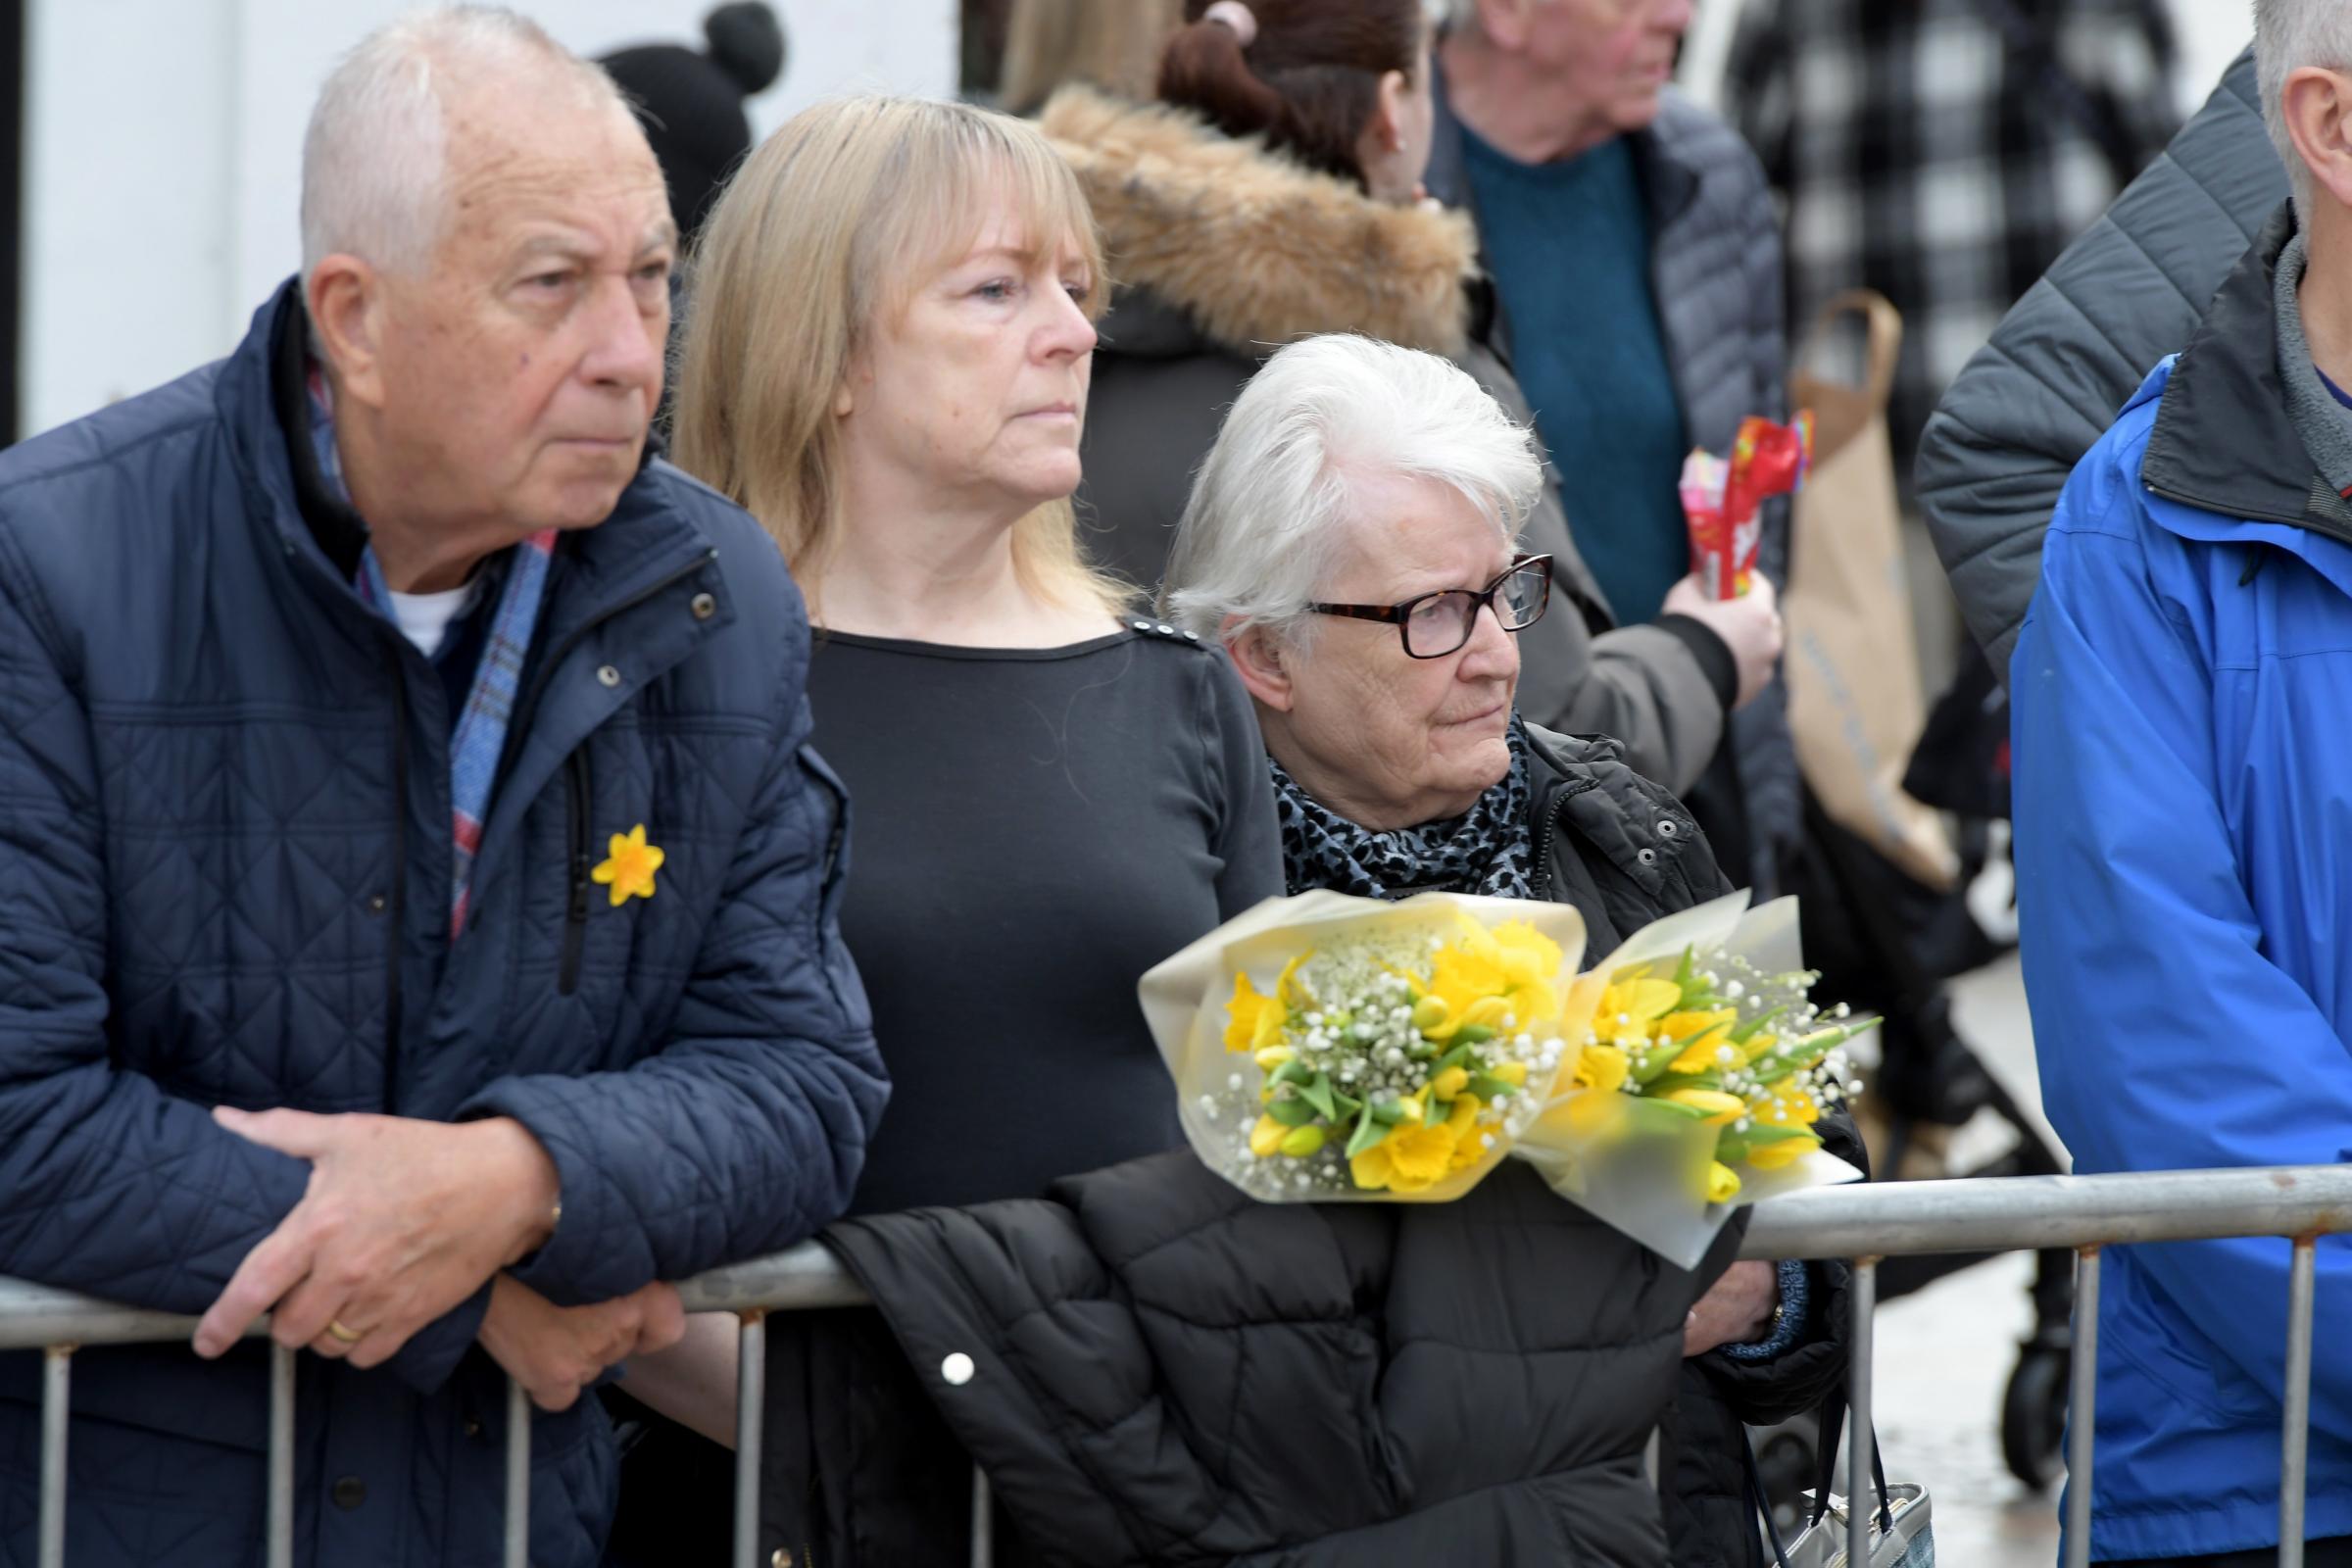 Residents in the town centre pay their respects